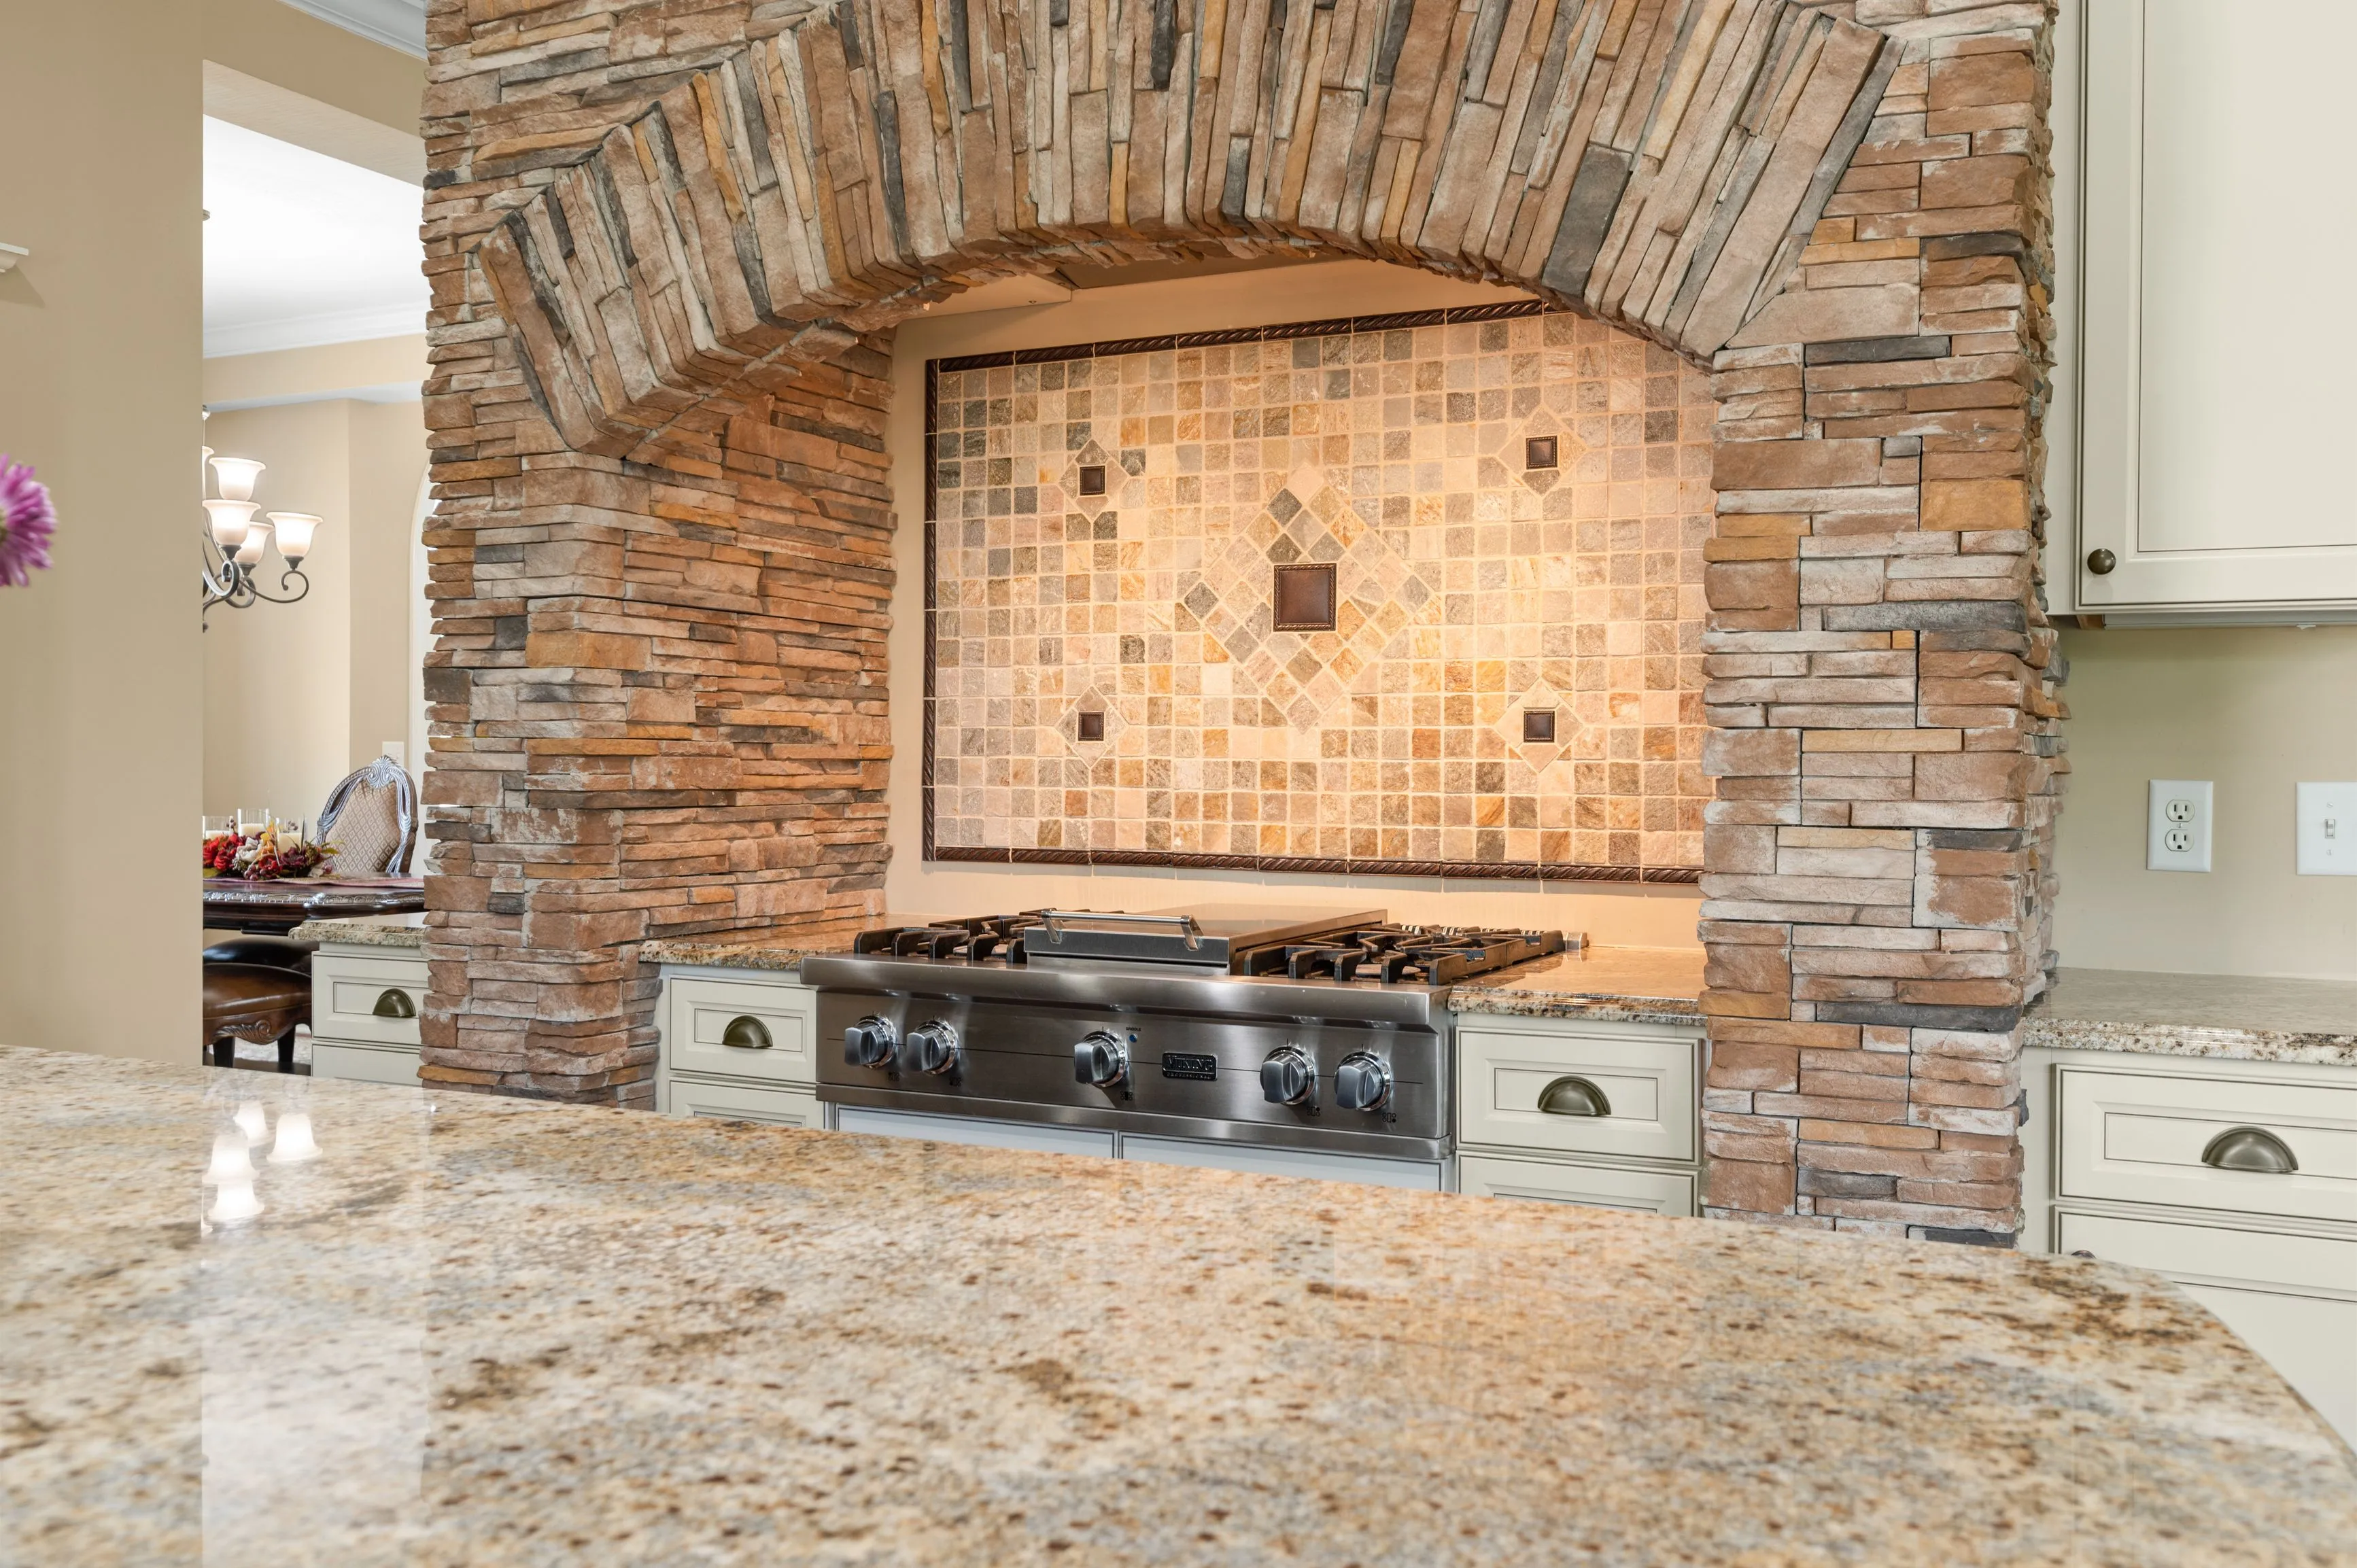 Modern kitchen with stone archway over a stainless steel gas stove and decorative tile backsplash.